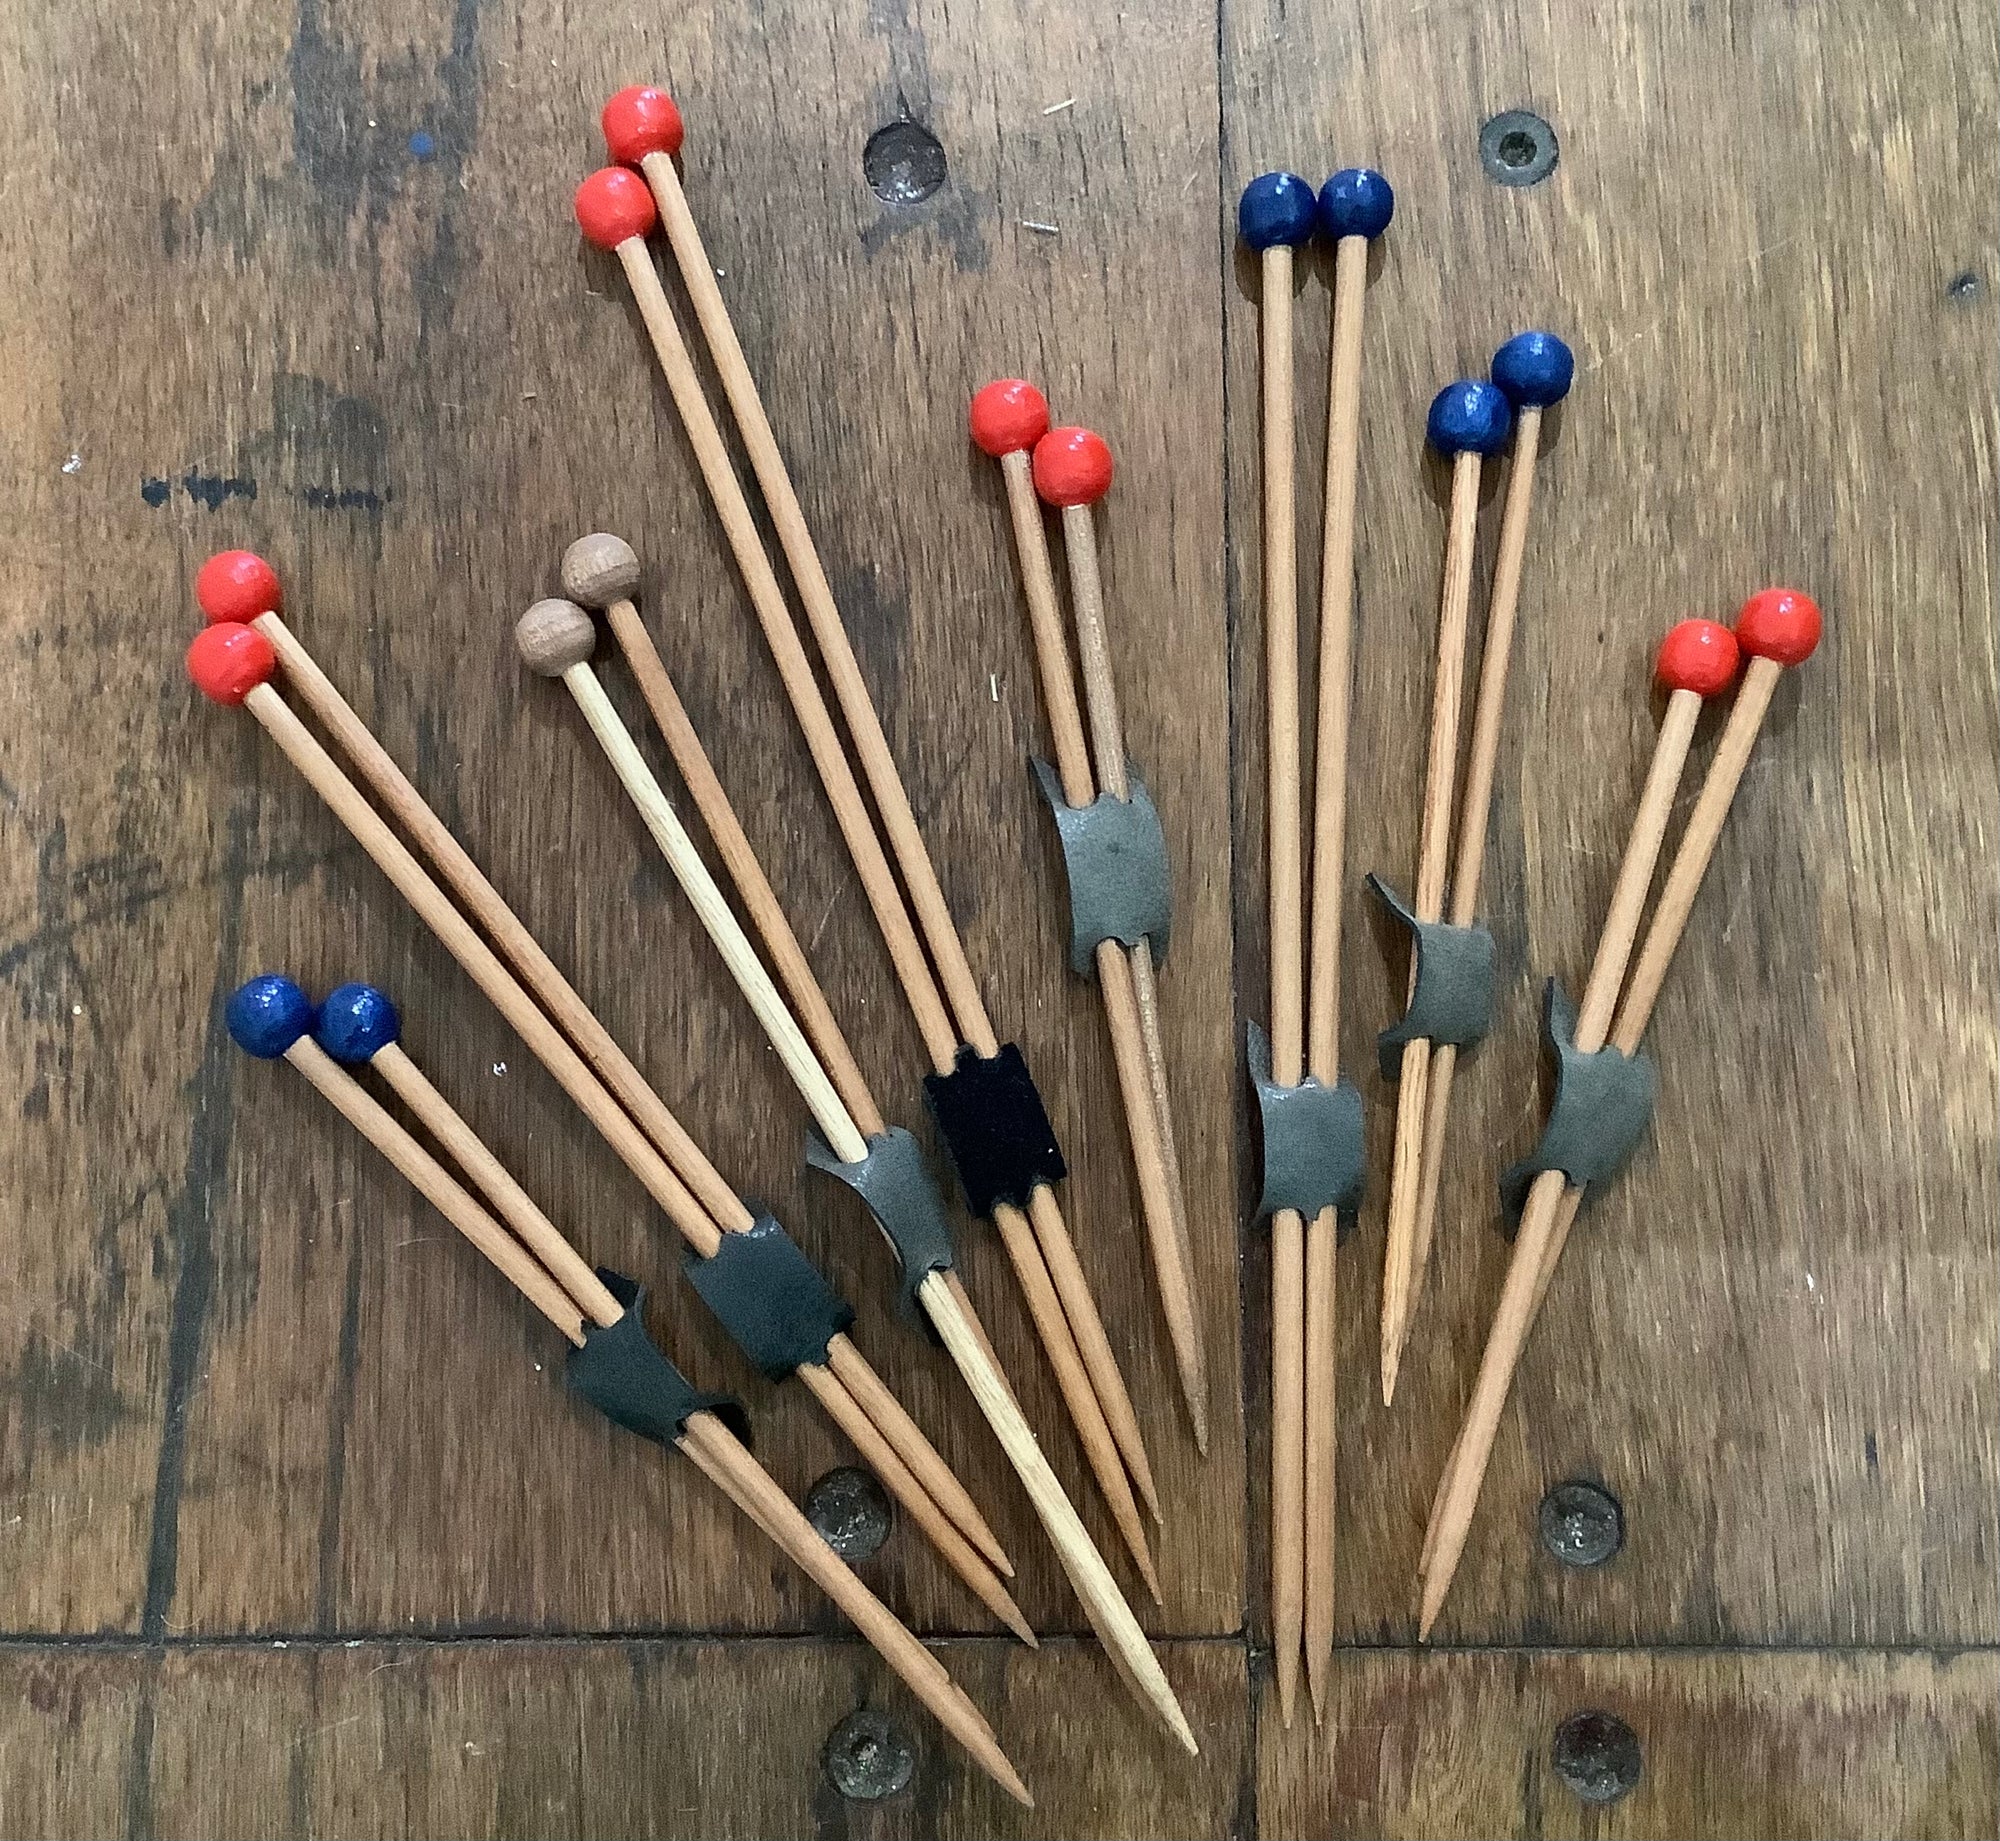 Hand crafted Knitting Needles